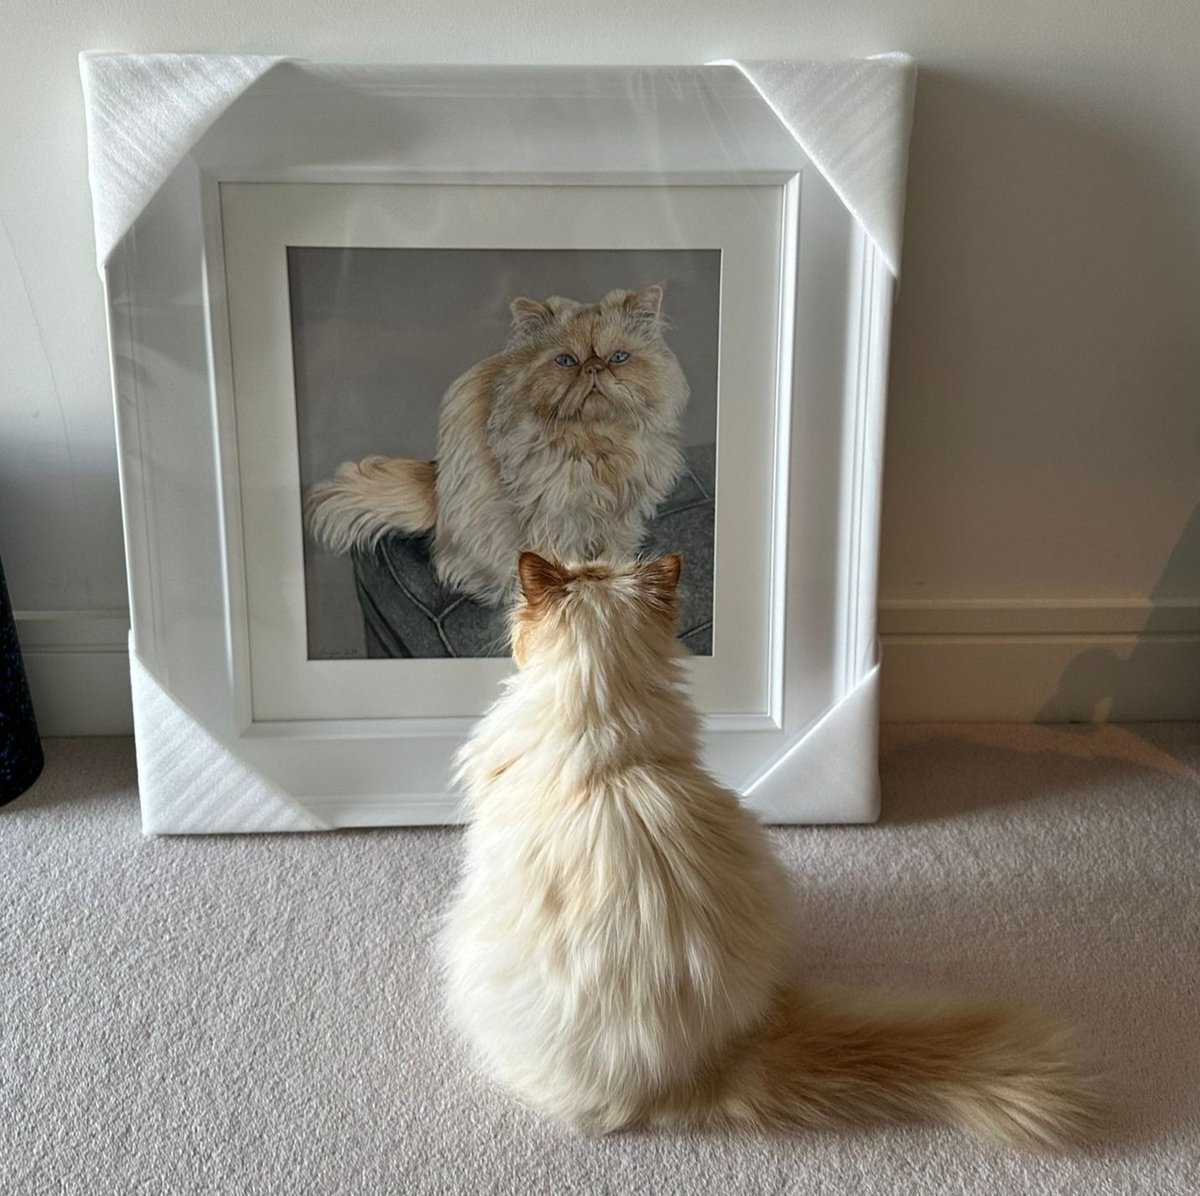 Receiving a photo like this truly makes my job as an artist so utterly special. Here's beautiful Winky admiring his pastel portrait in an exquisite choice of frame. @winkythelovelycat #catportrait #petportraitartist #pastelportrait #art #drawing